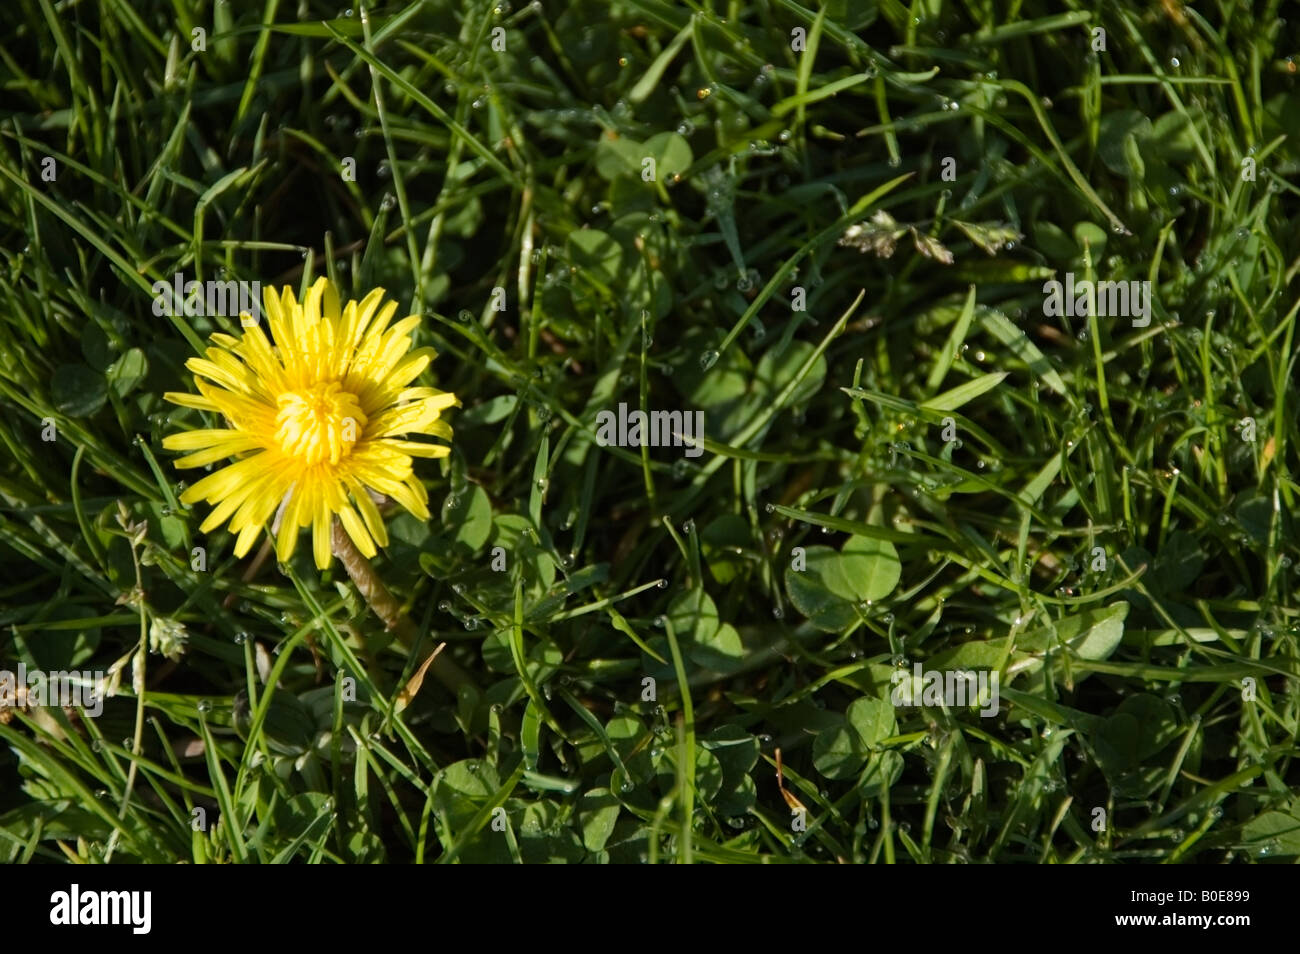 One yellow dandelion wild flower on a bed of wet green grass, abstract, Hyde Park, London, Great Britain, UK, Europe Stock Photo